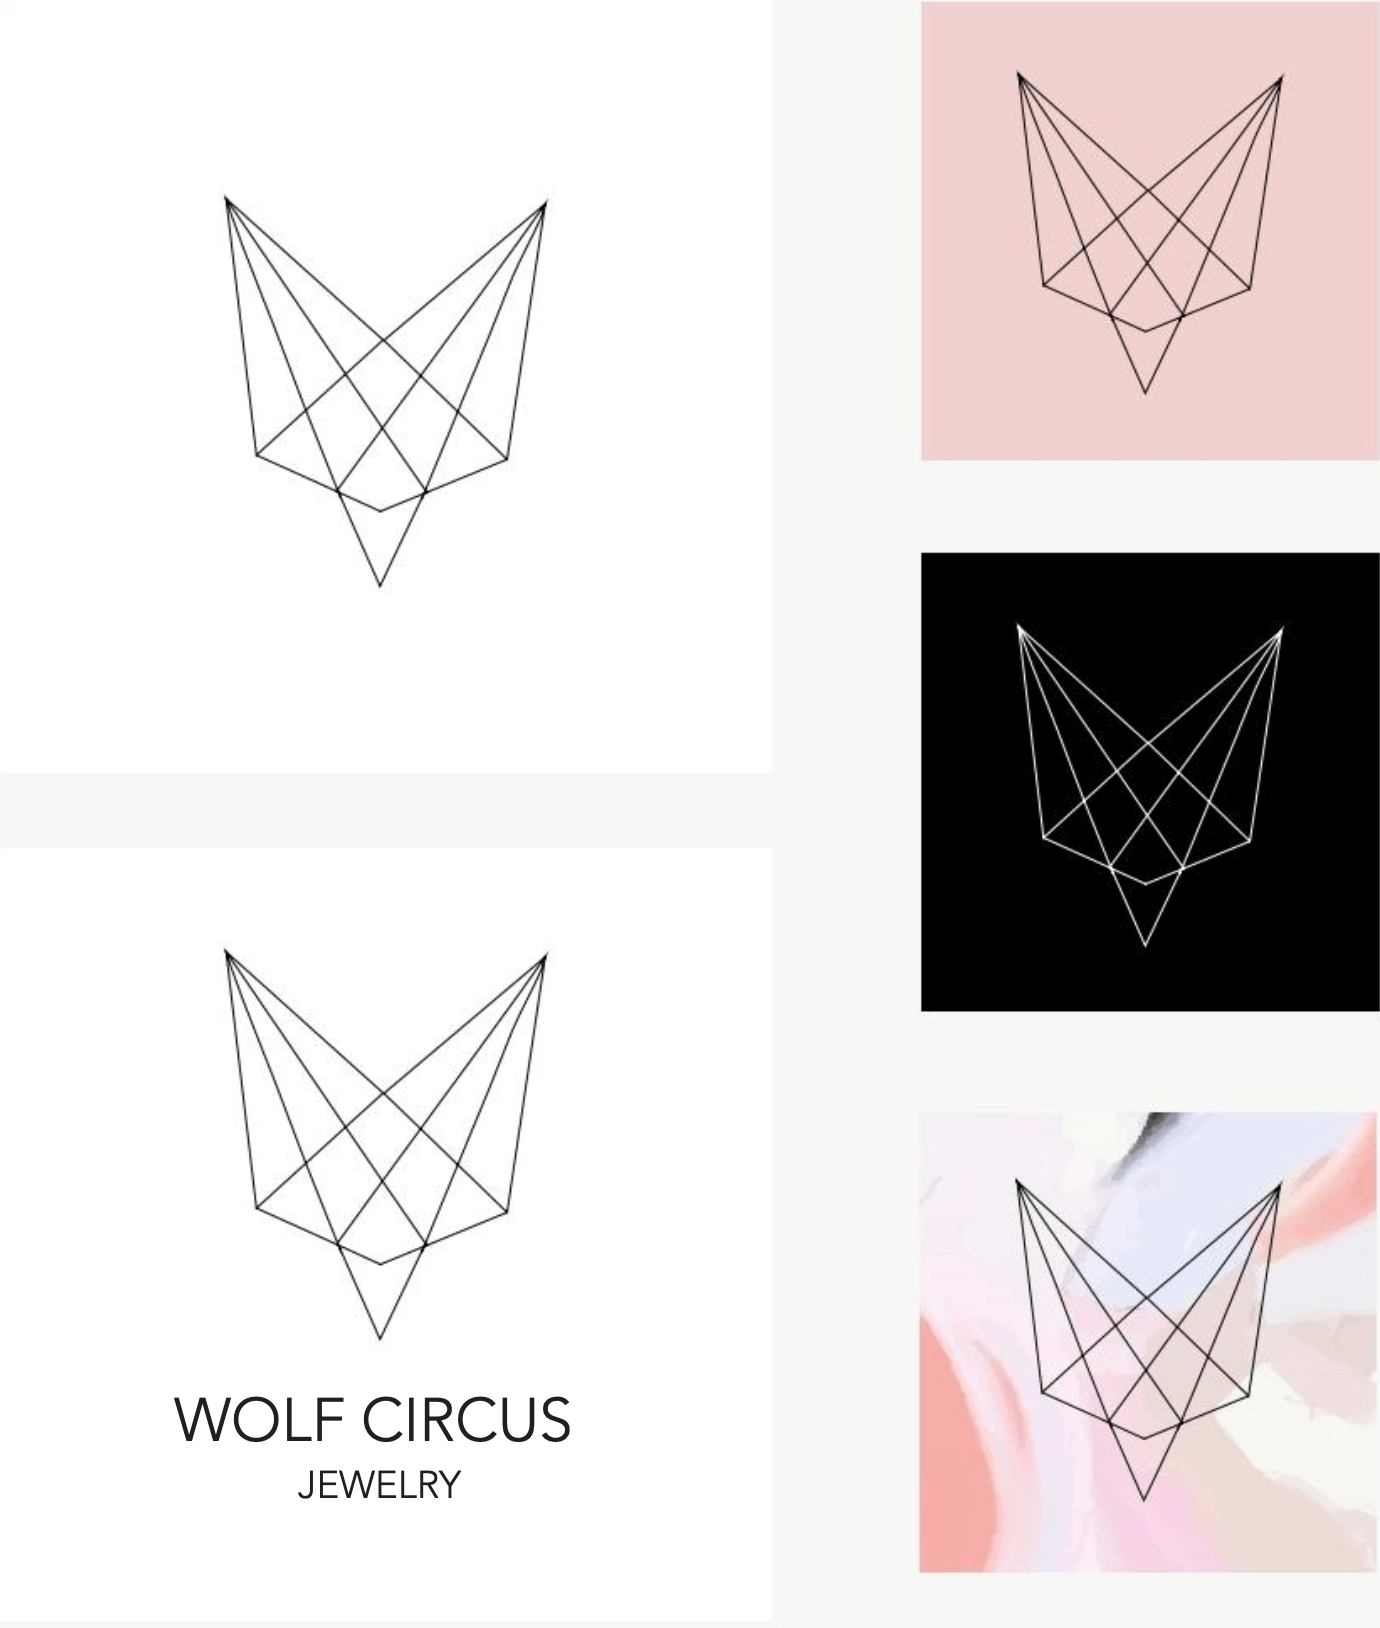 Wold Circus Jewelry's acceptable logo variations